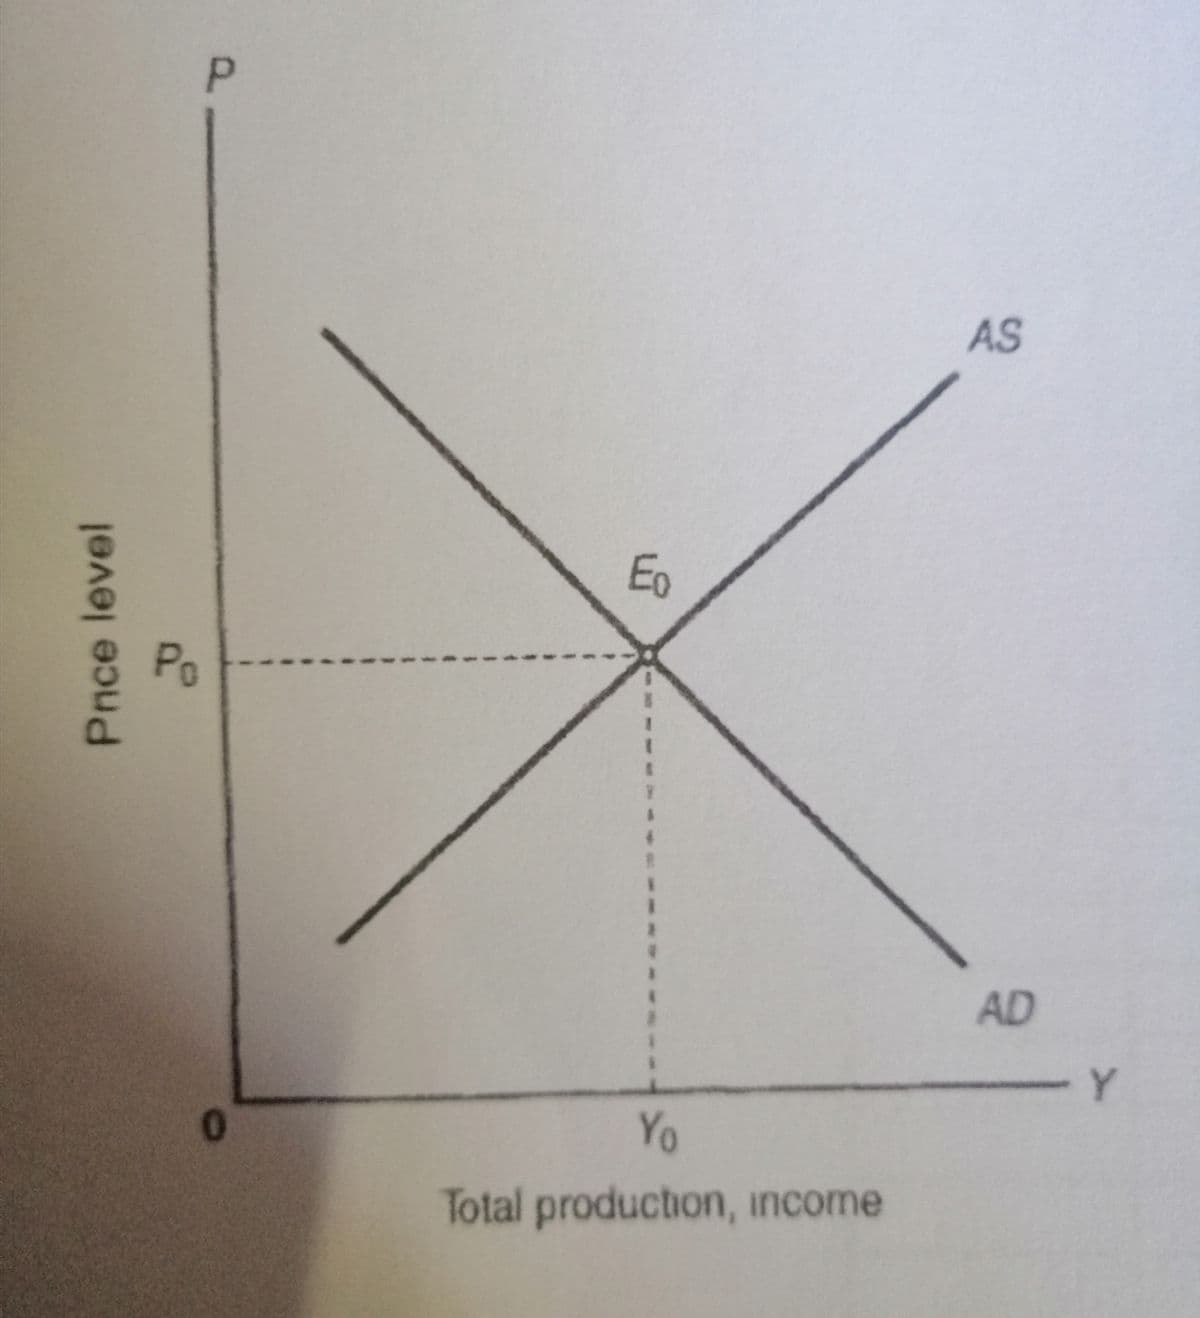 P.
AS
Eo
Po
AD
-Y
Yo
Total production, income
Pnce level
